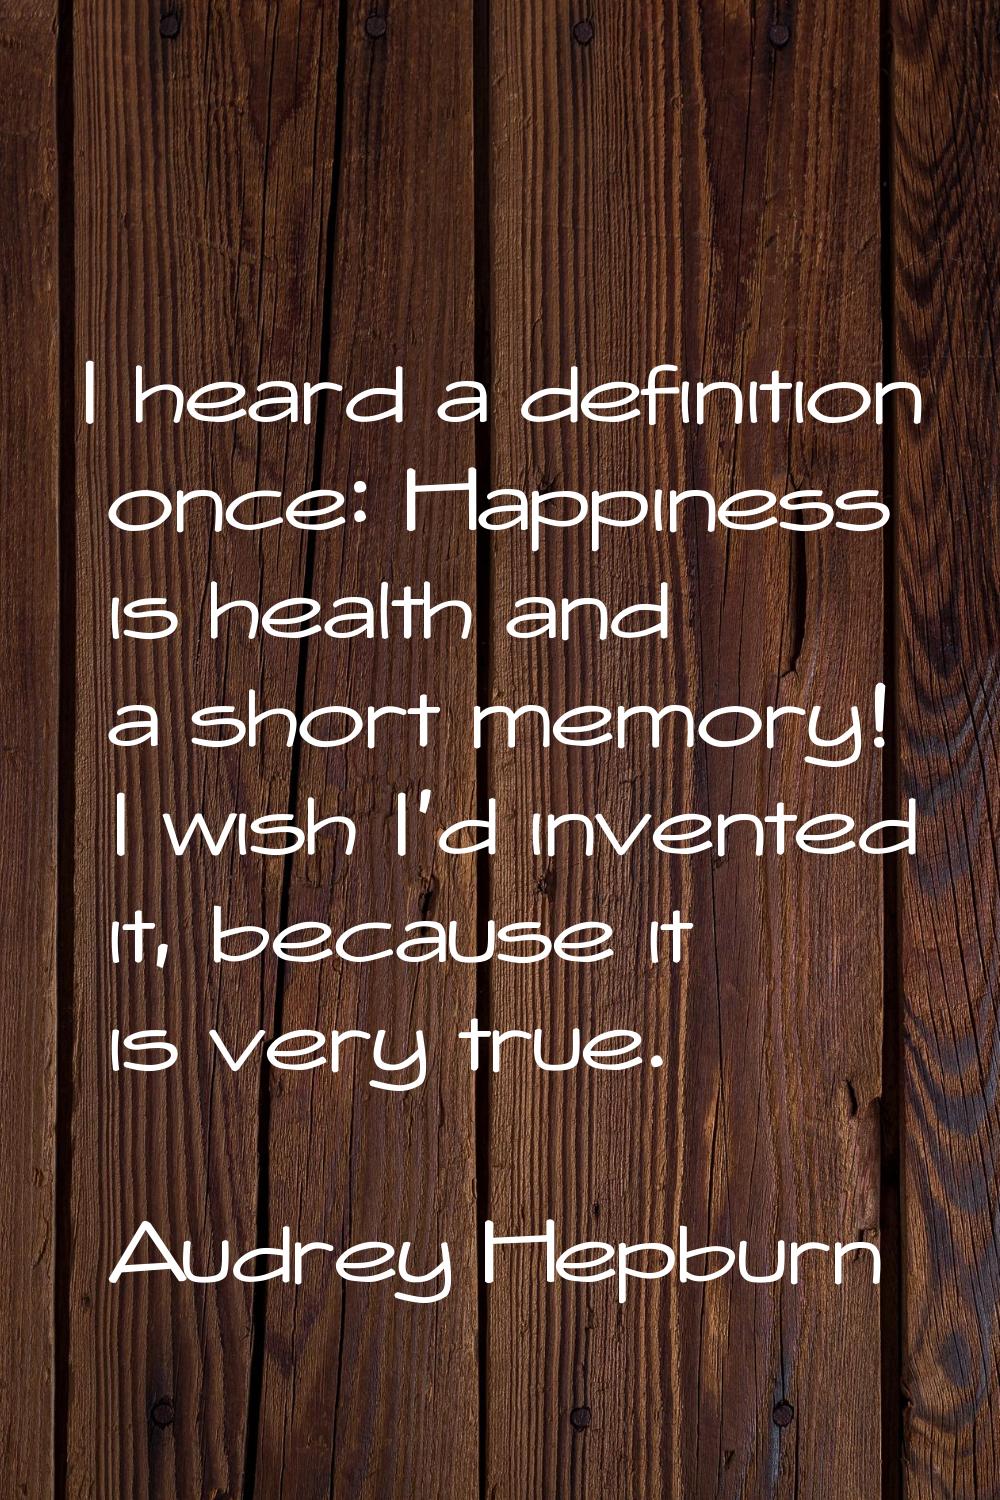 I heard a definition once: Happiness is health and a short memory! I wish I'd invented it, because 